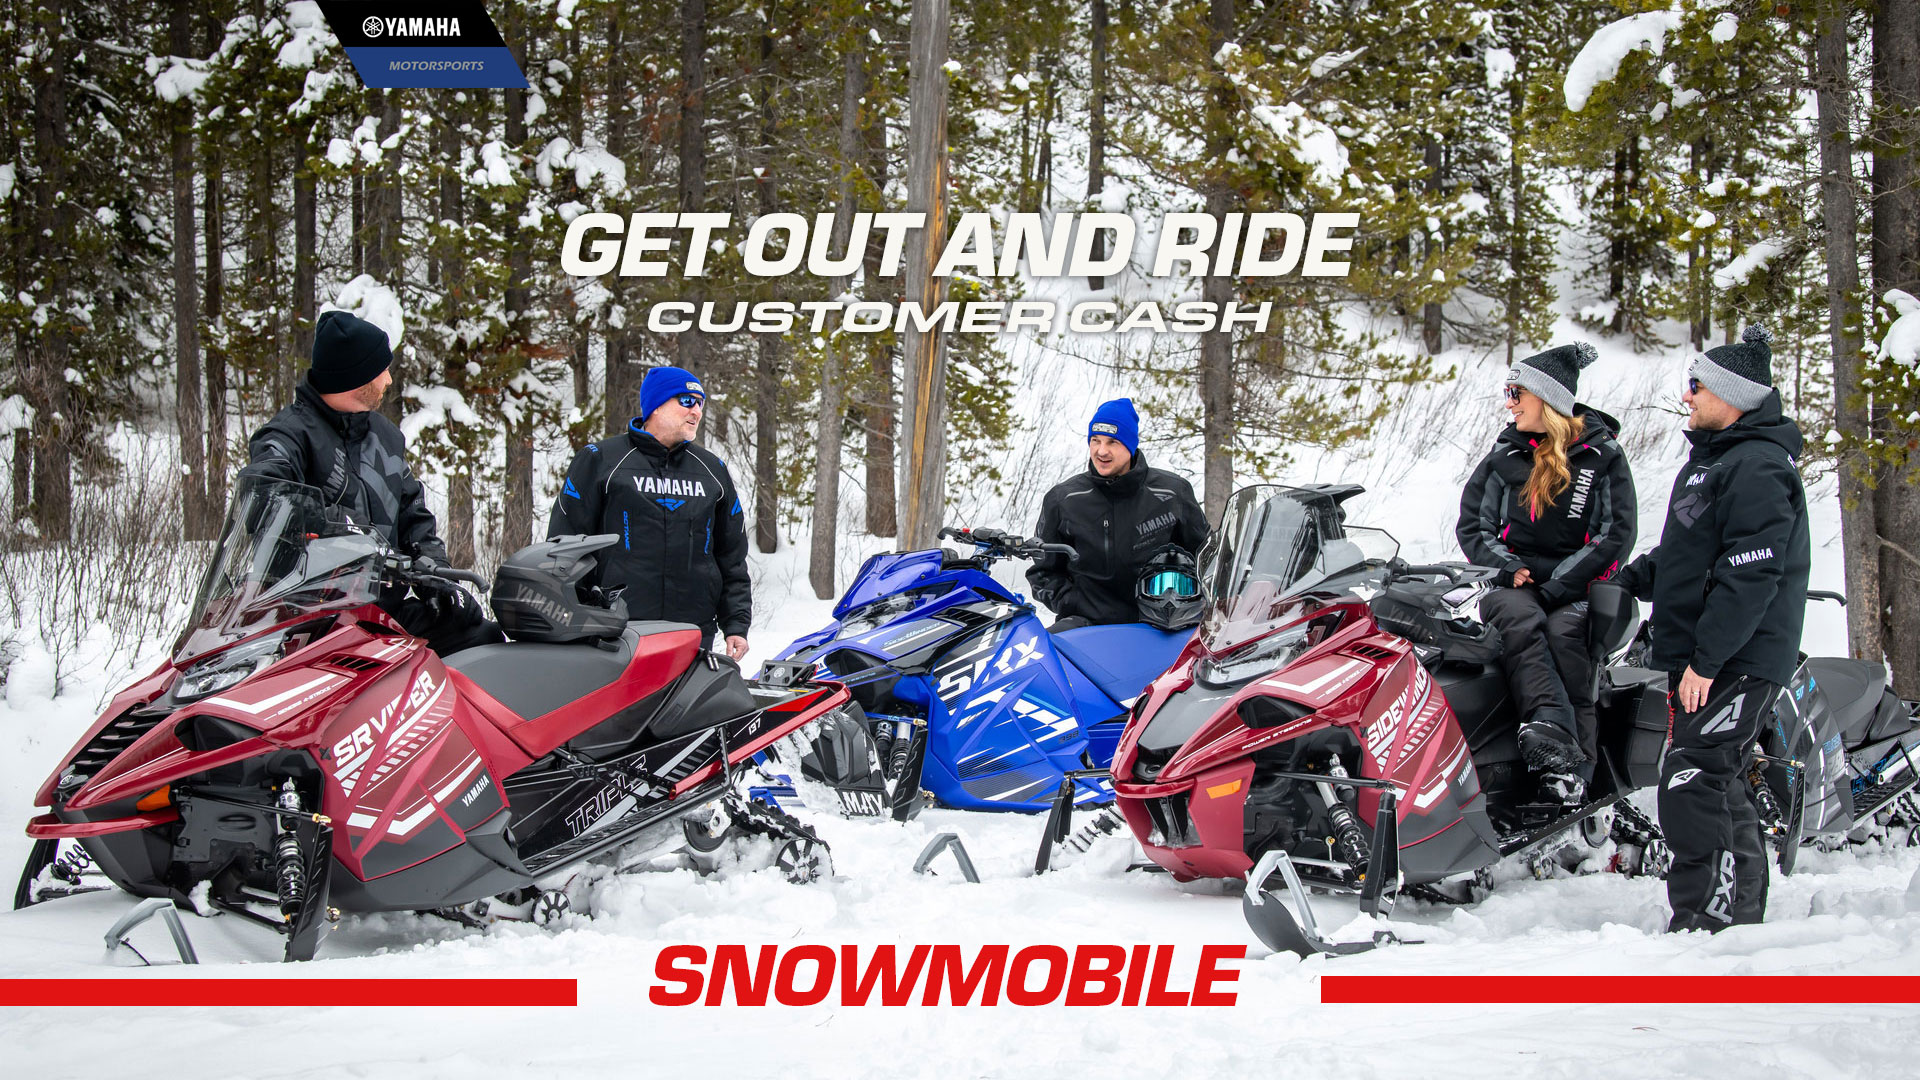 GET OUT AND RIDE - Snowmobile